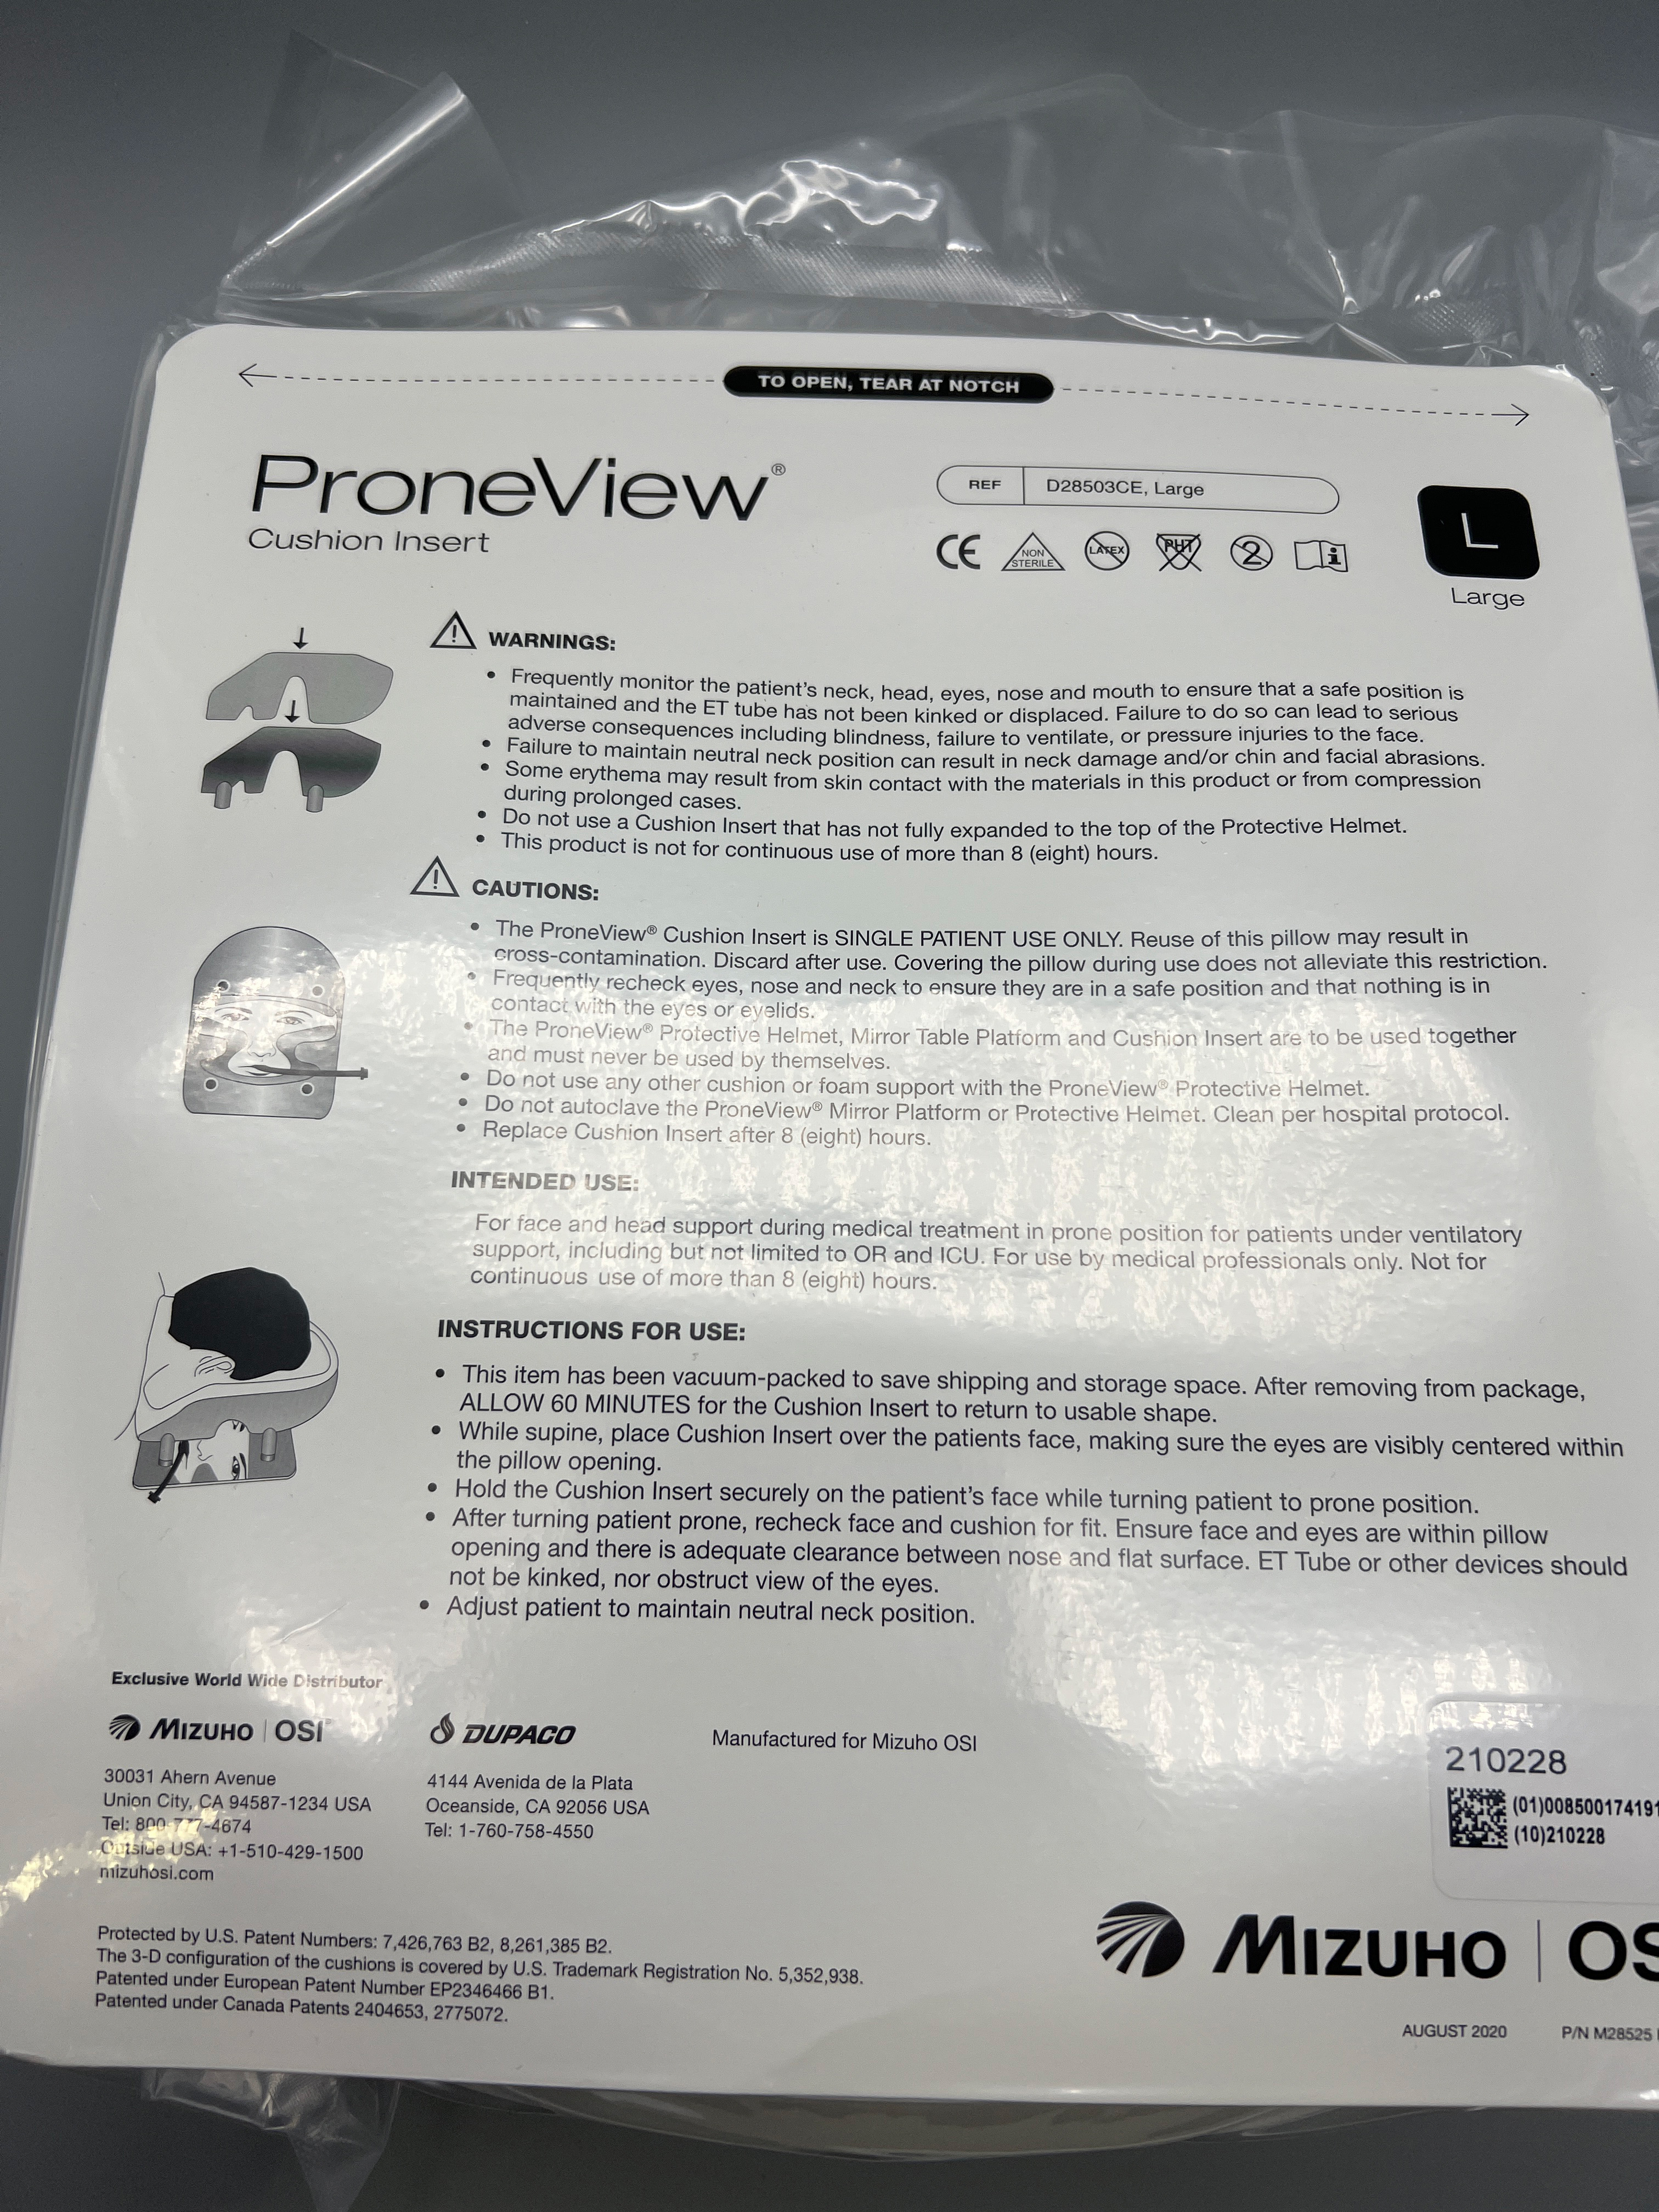 PRONEVIEW CUSHION INSERT FOR FACE AND HEAD SUPPORT DURING MEDICAL TREATMENT IN PRONE POSTION FOR PATIENTS